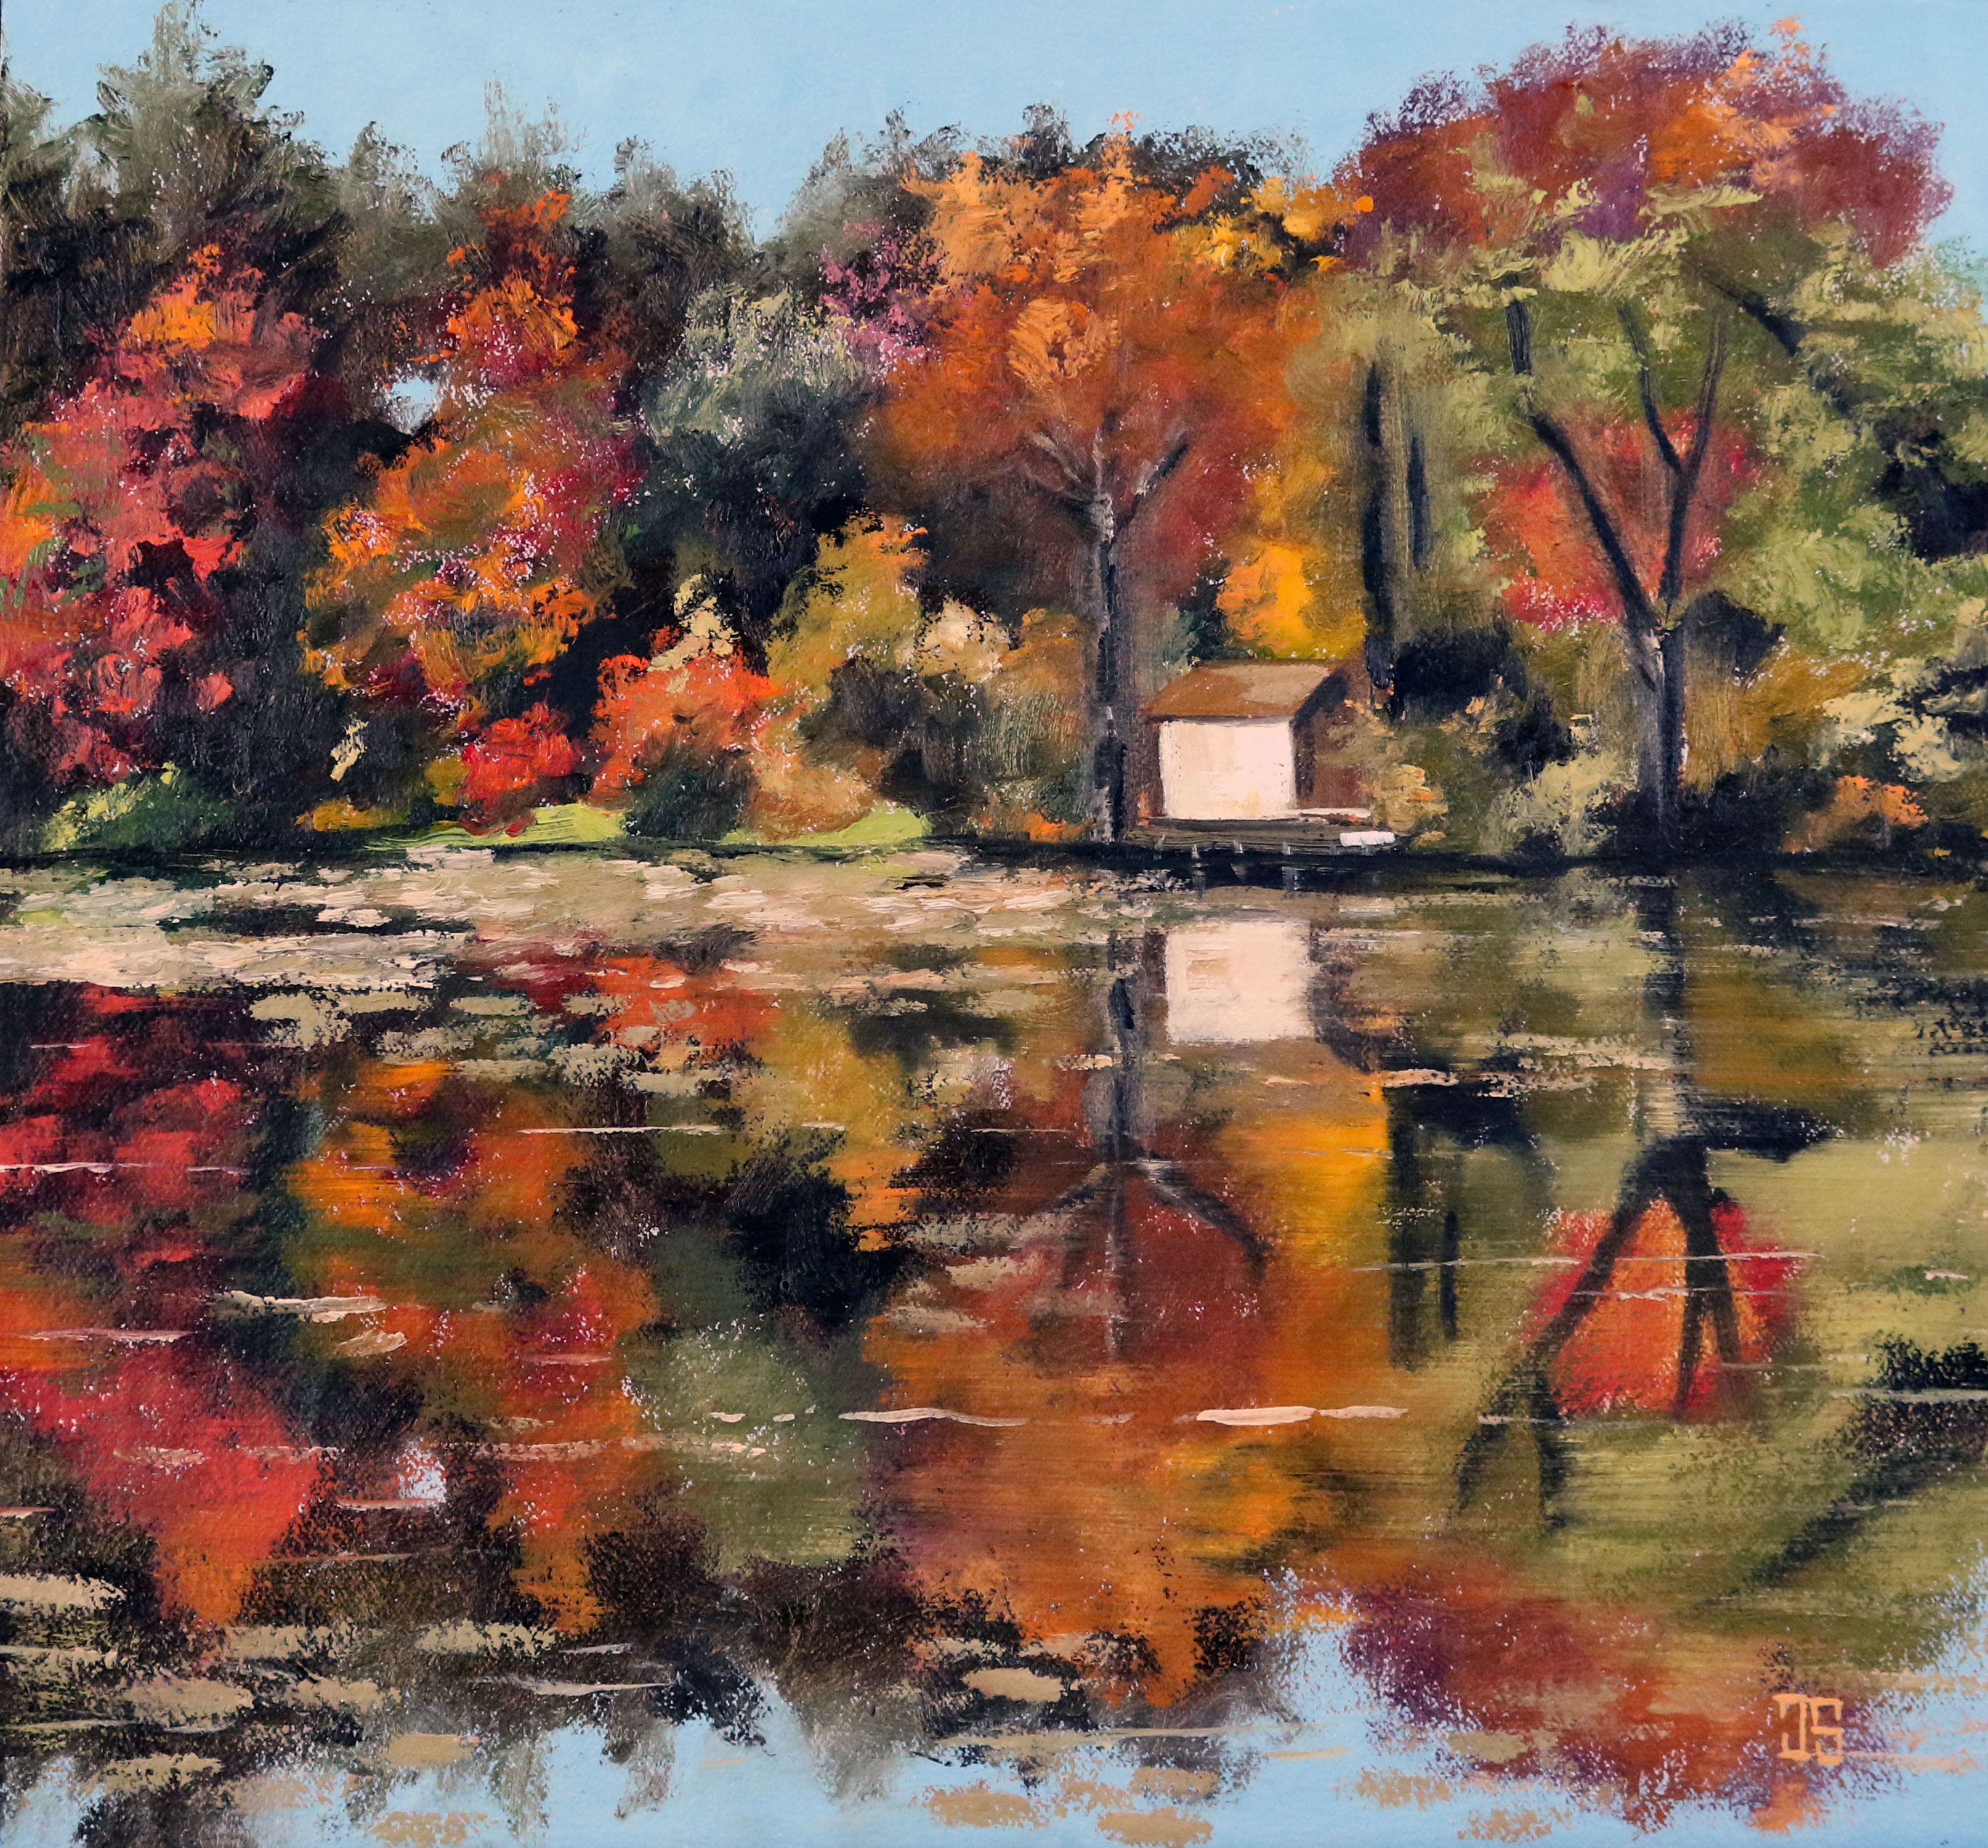 Oil painting "Lake House" by Jeffrey Dale Starr